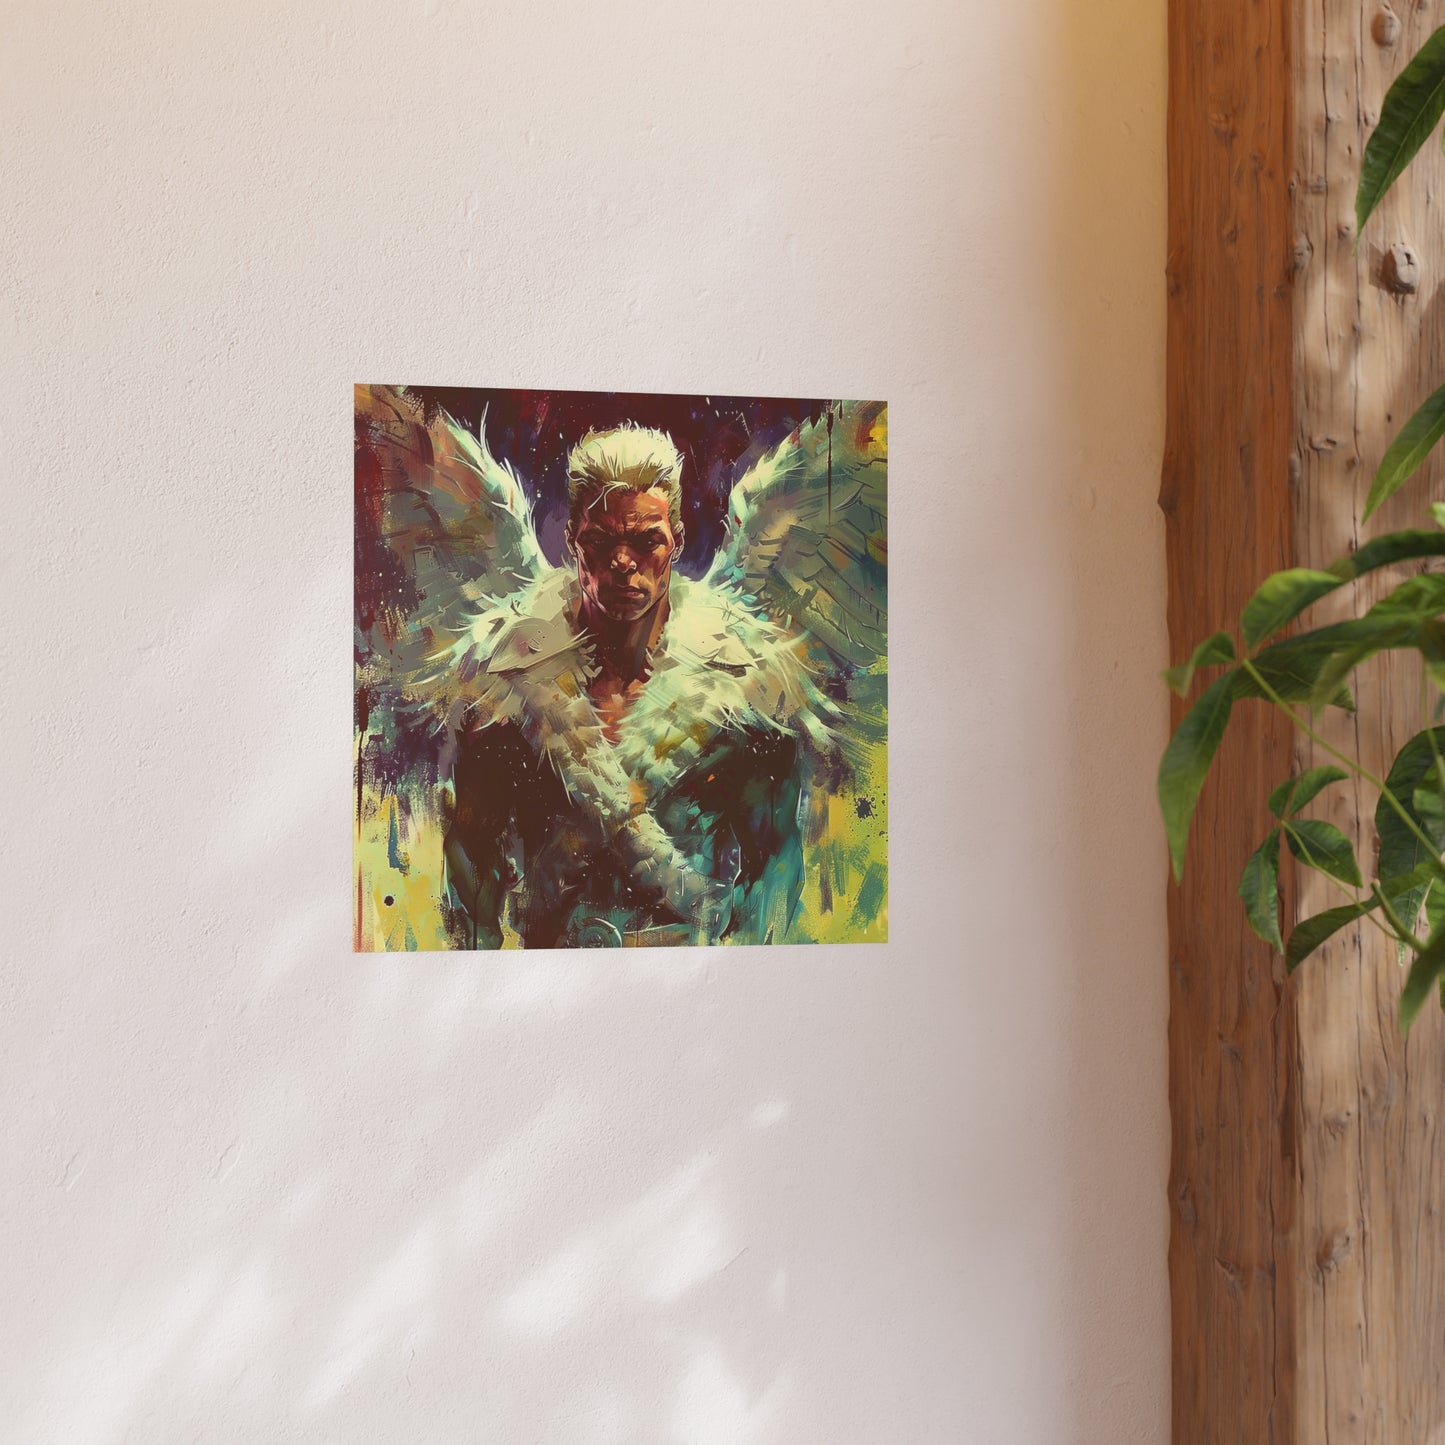 Satin and Archival Matte Posters: Angel (inspired by Marvel)